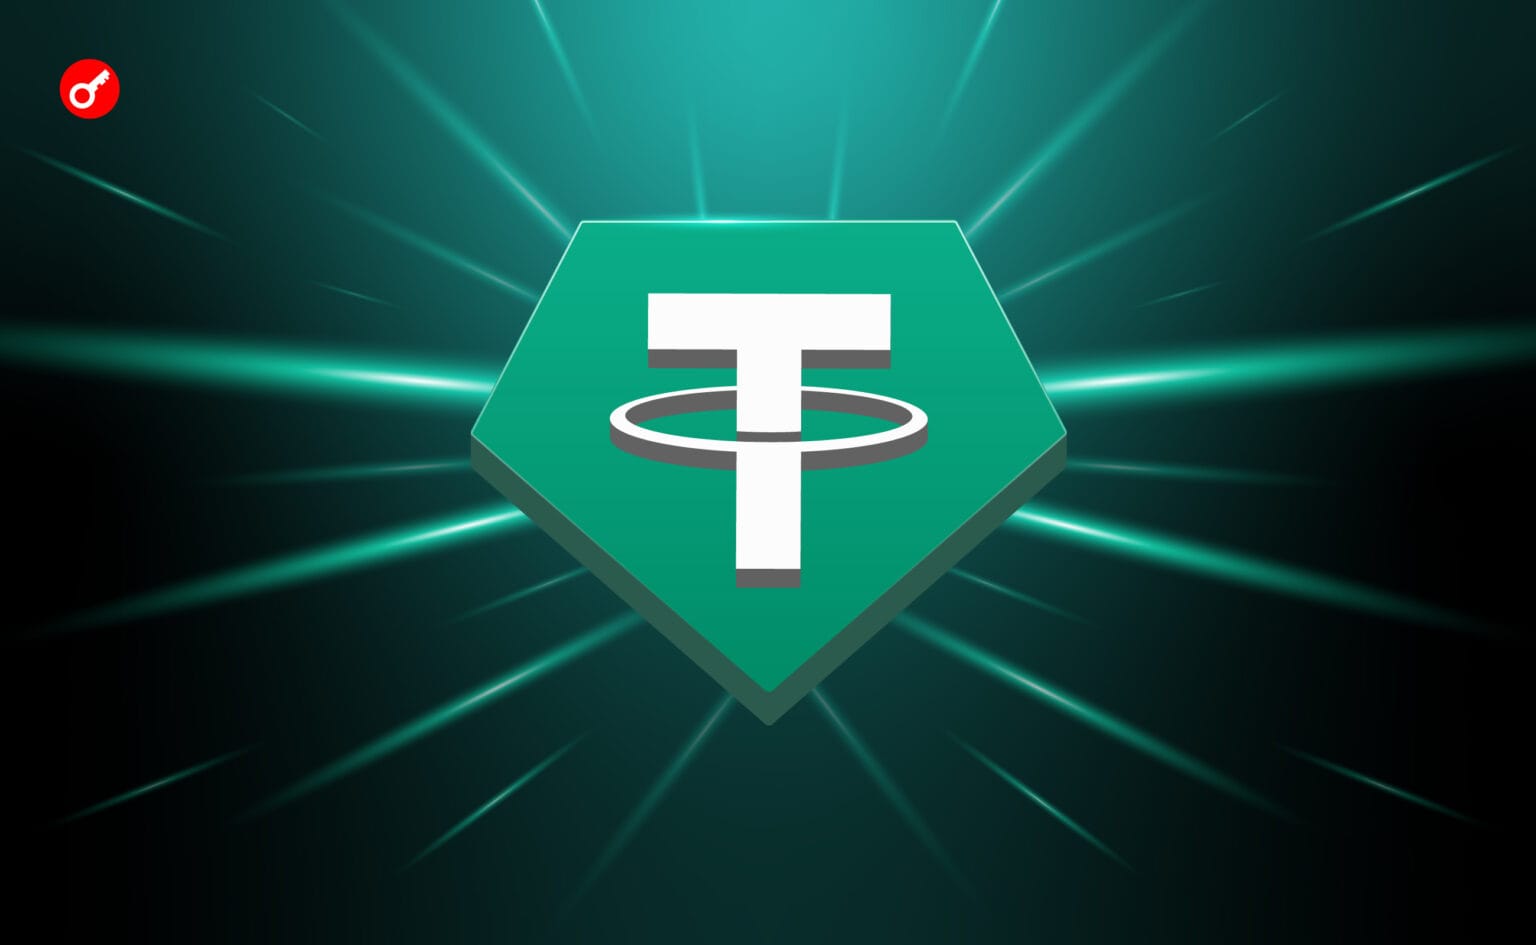 Tether announced the launch of USDT on the Celo network